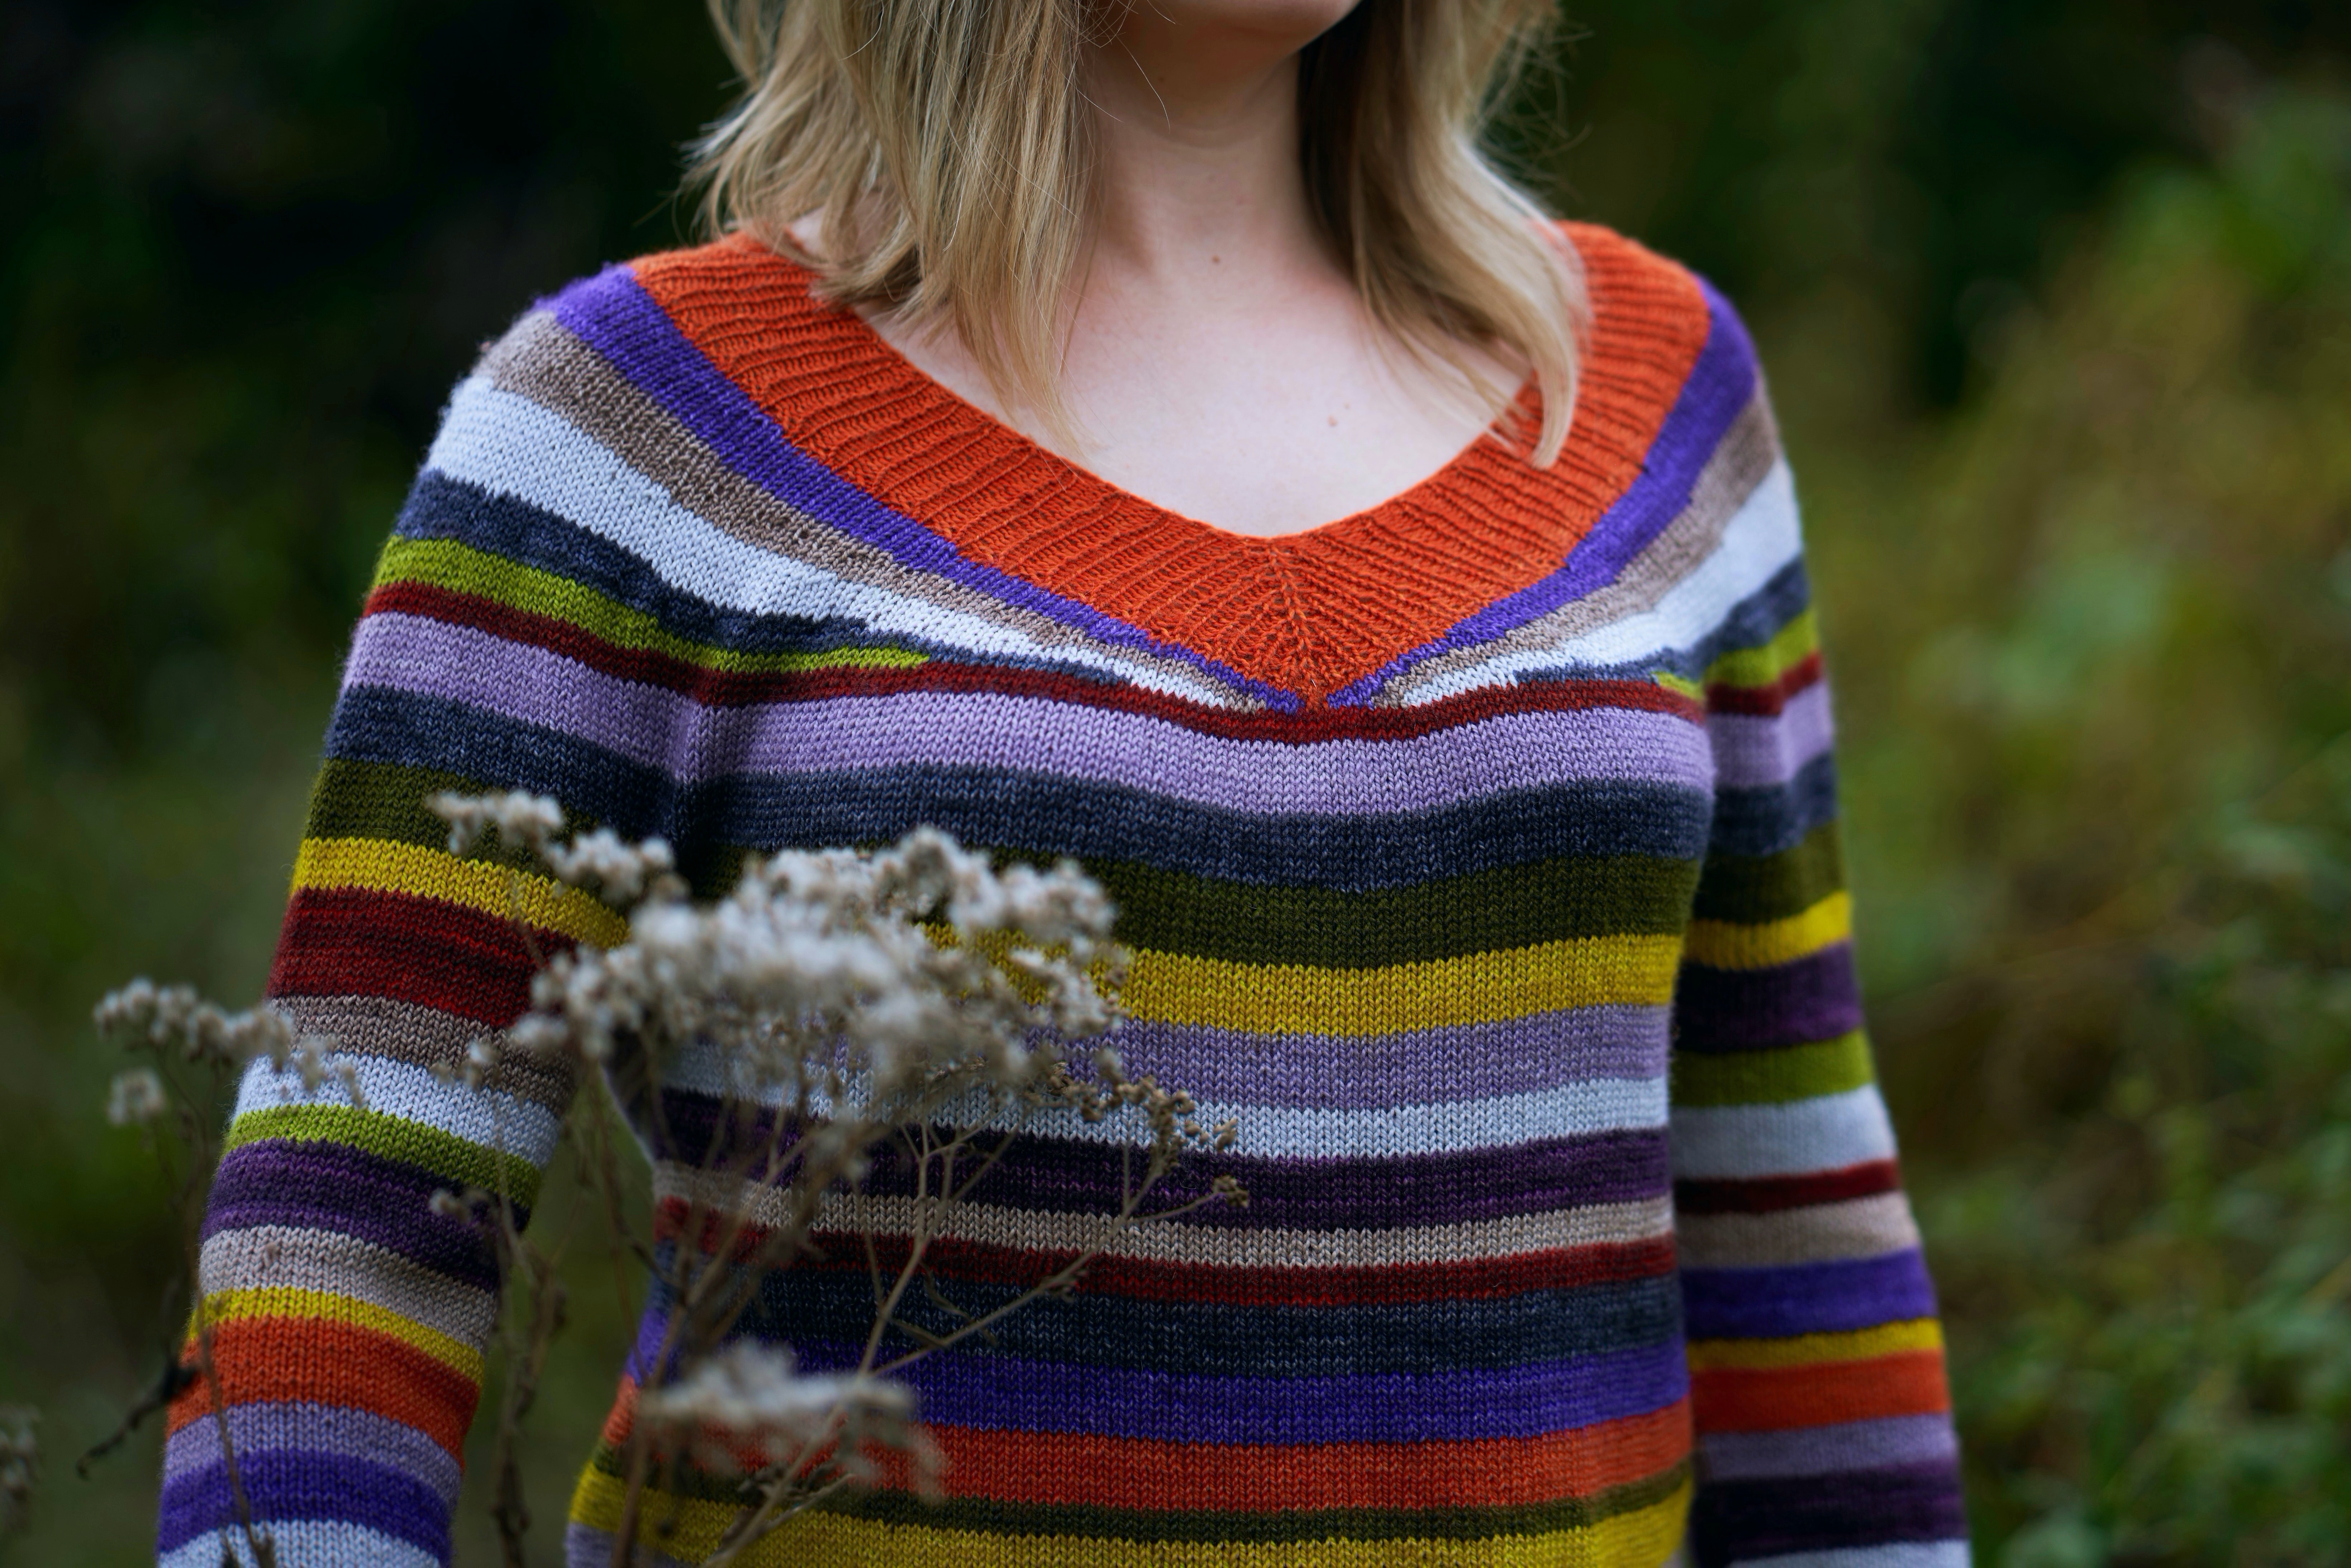 A closeup of a v-neck striped sweater knit in orange, green, purple, yellow and gray colors